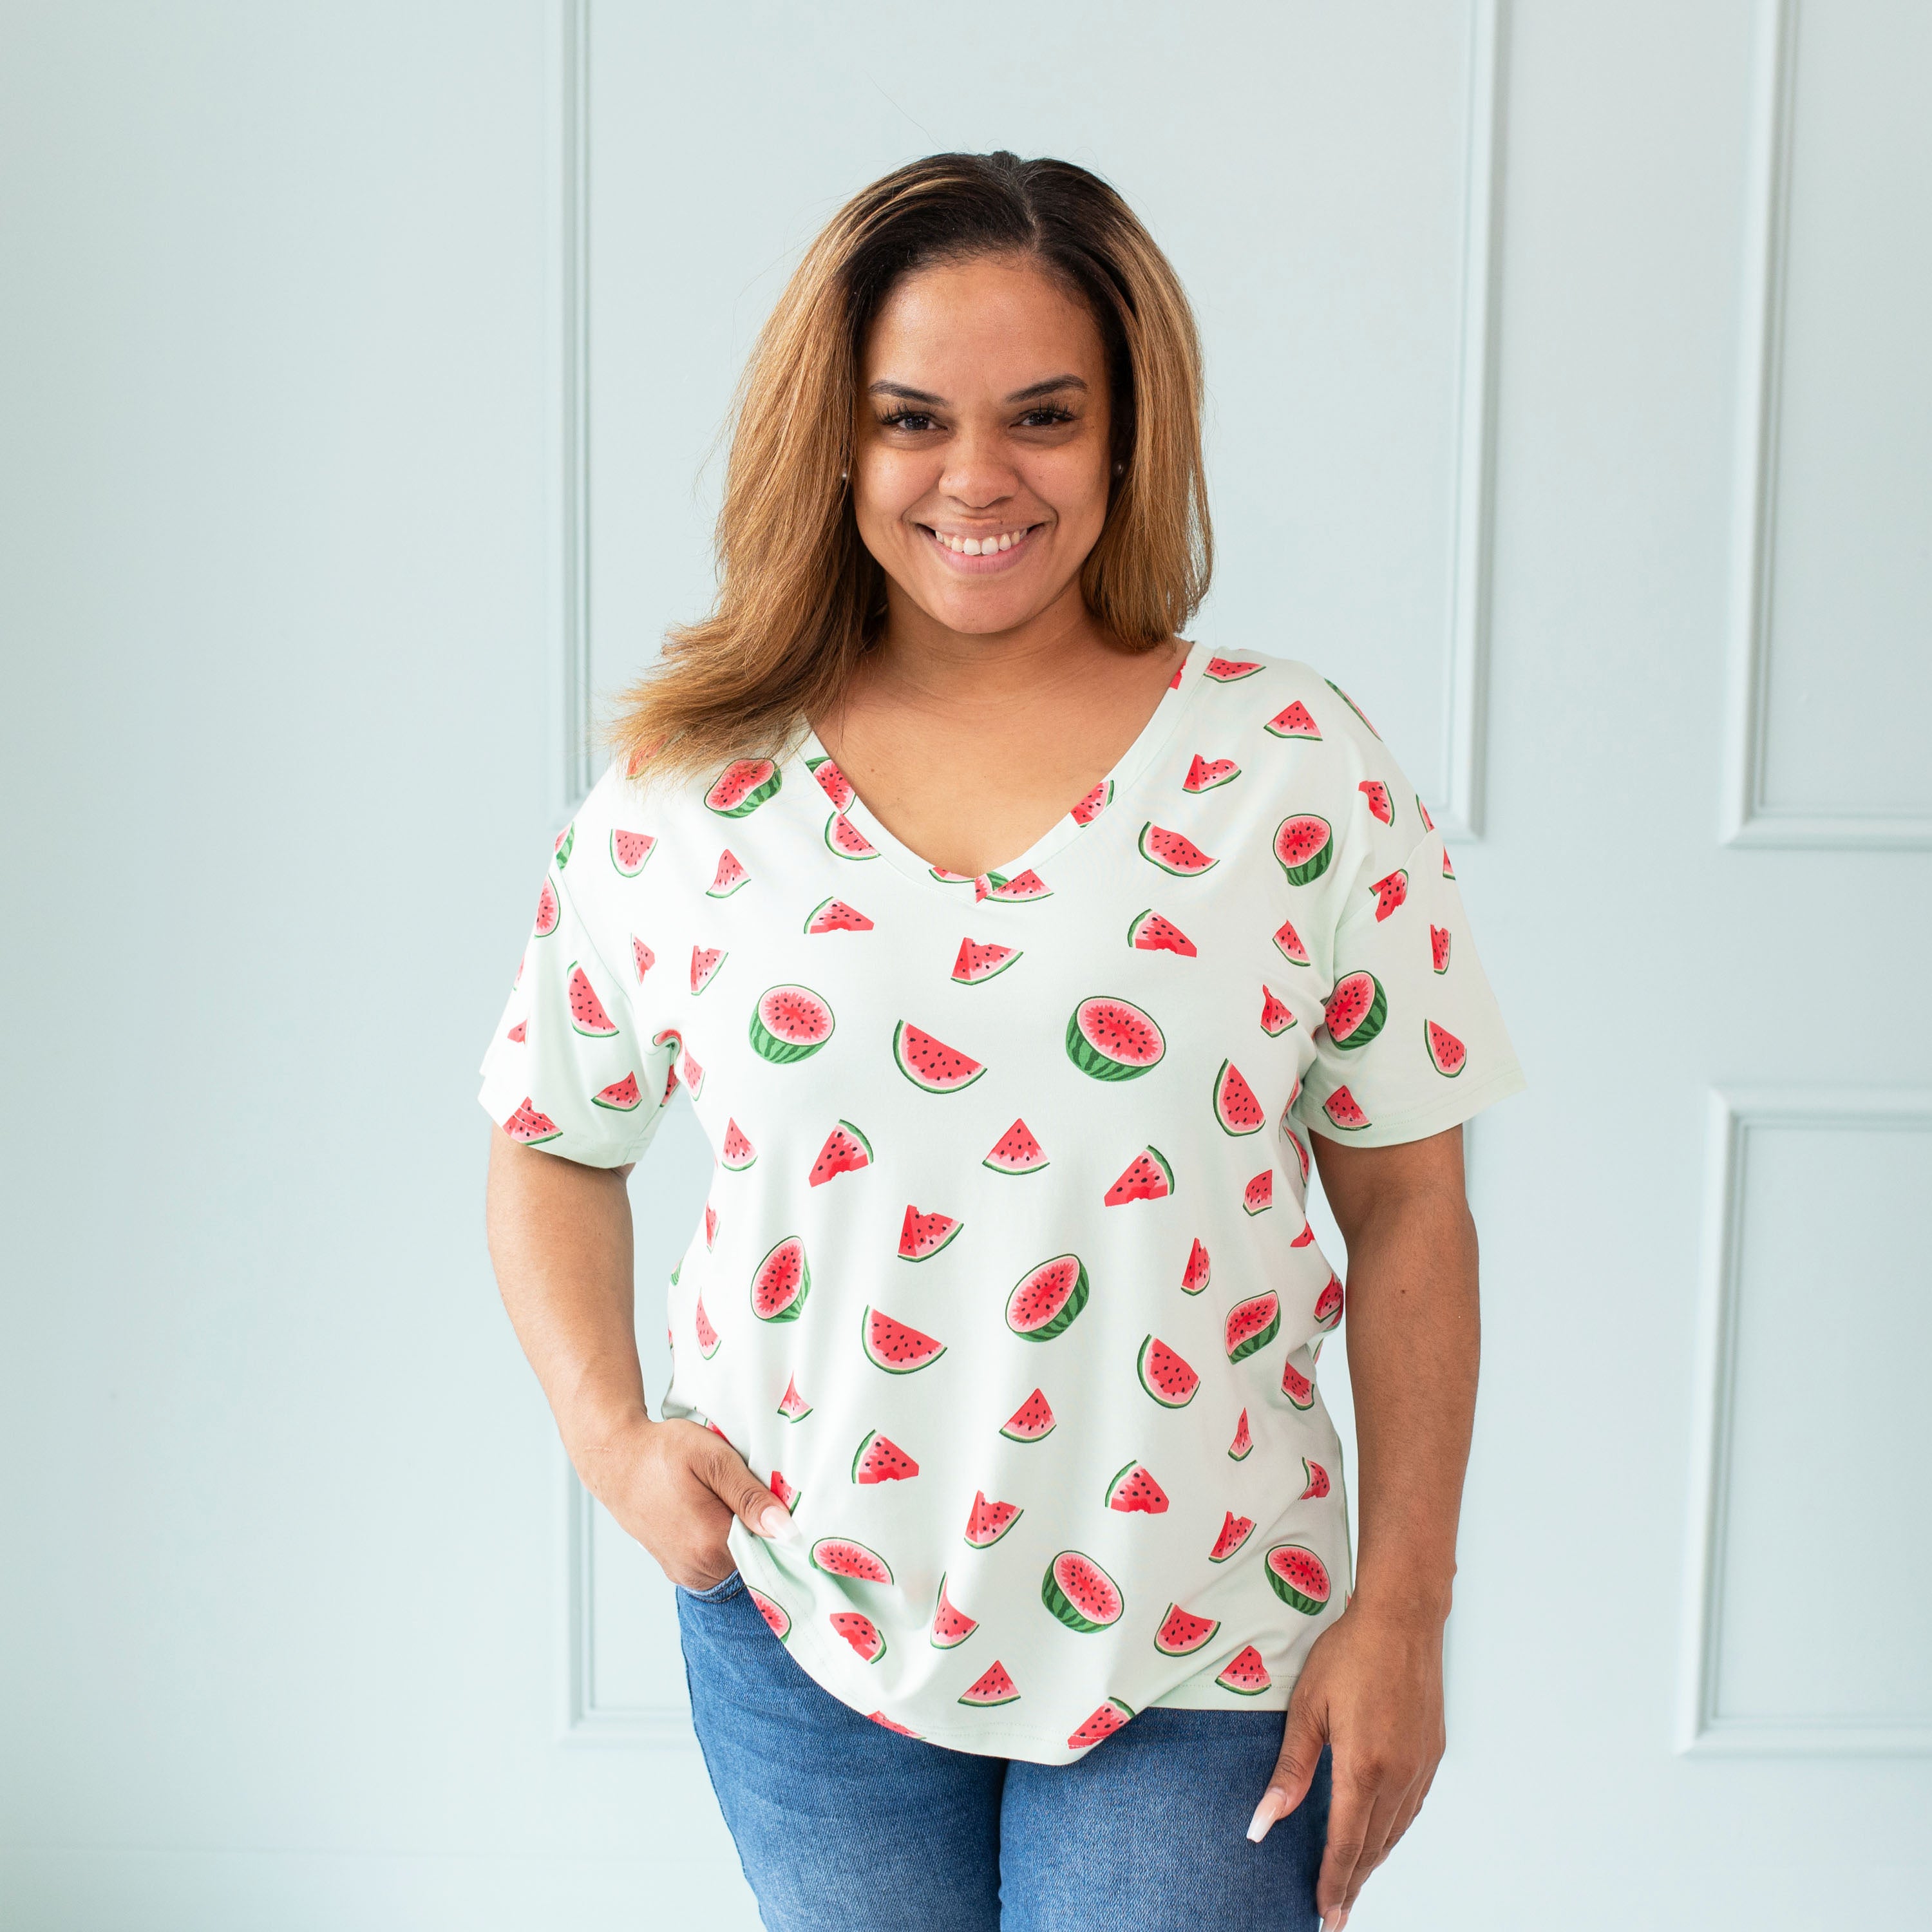 Women’s Relaxed Fit V-Neck in Watermelon